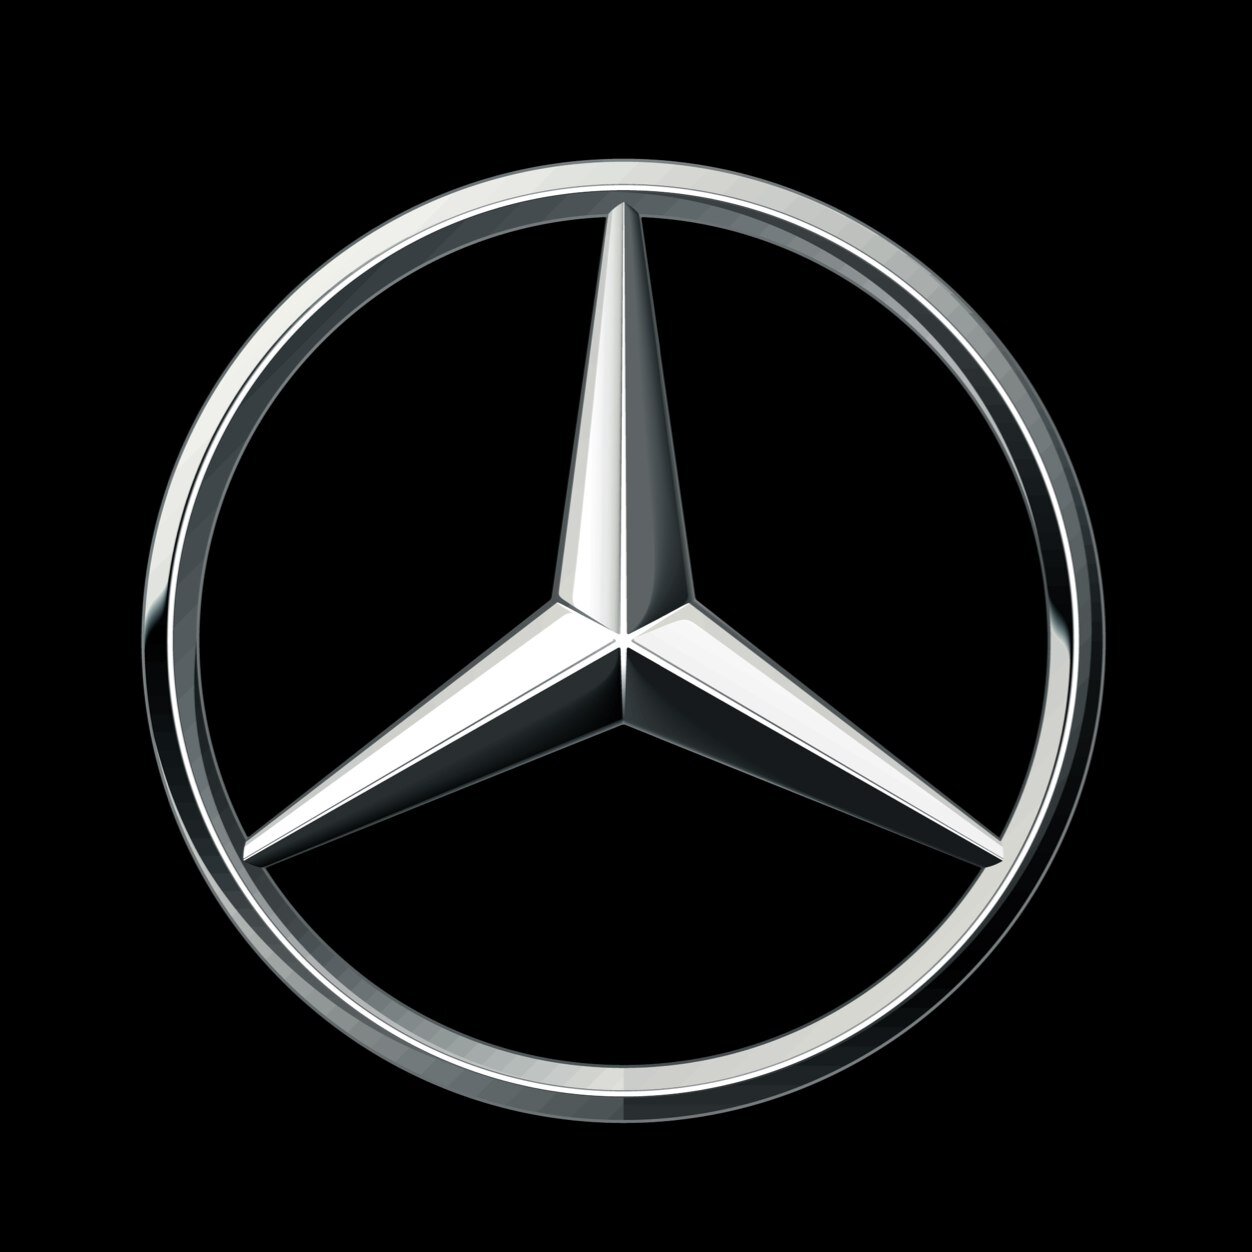 Mercedes Benz Self Employeed Mechanic (NOT PART OF THE OFFICIAL MERCEDES COMPANY)